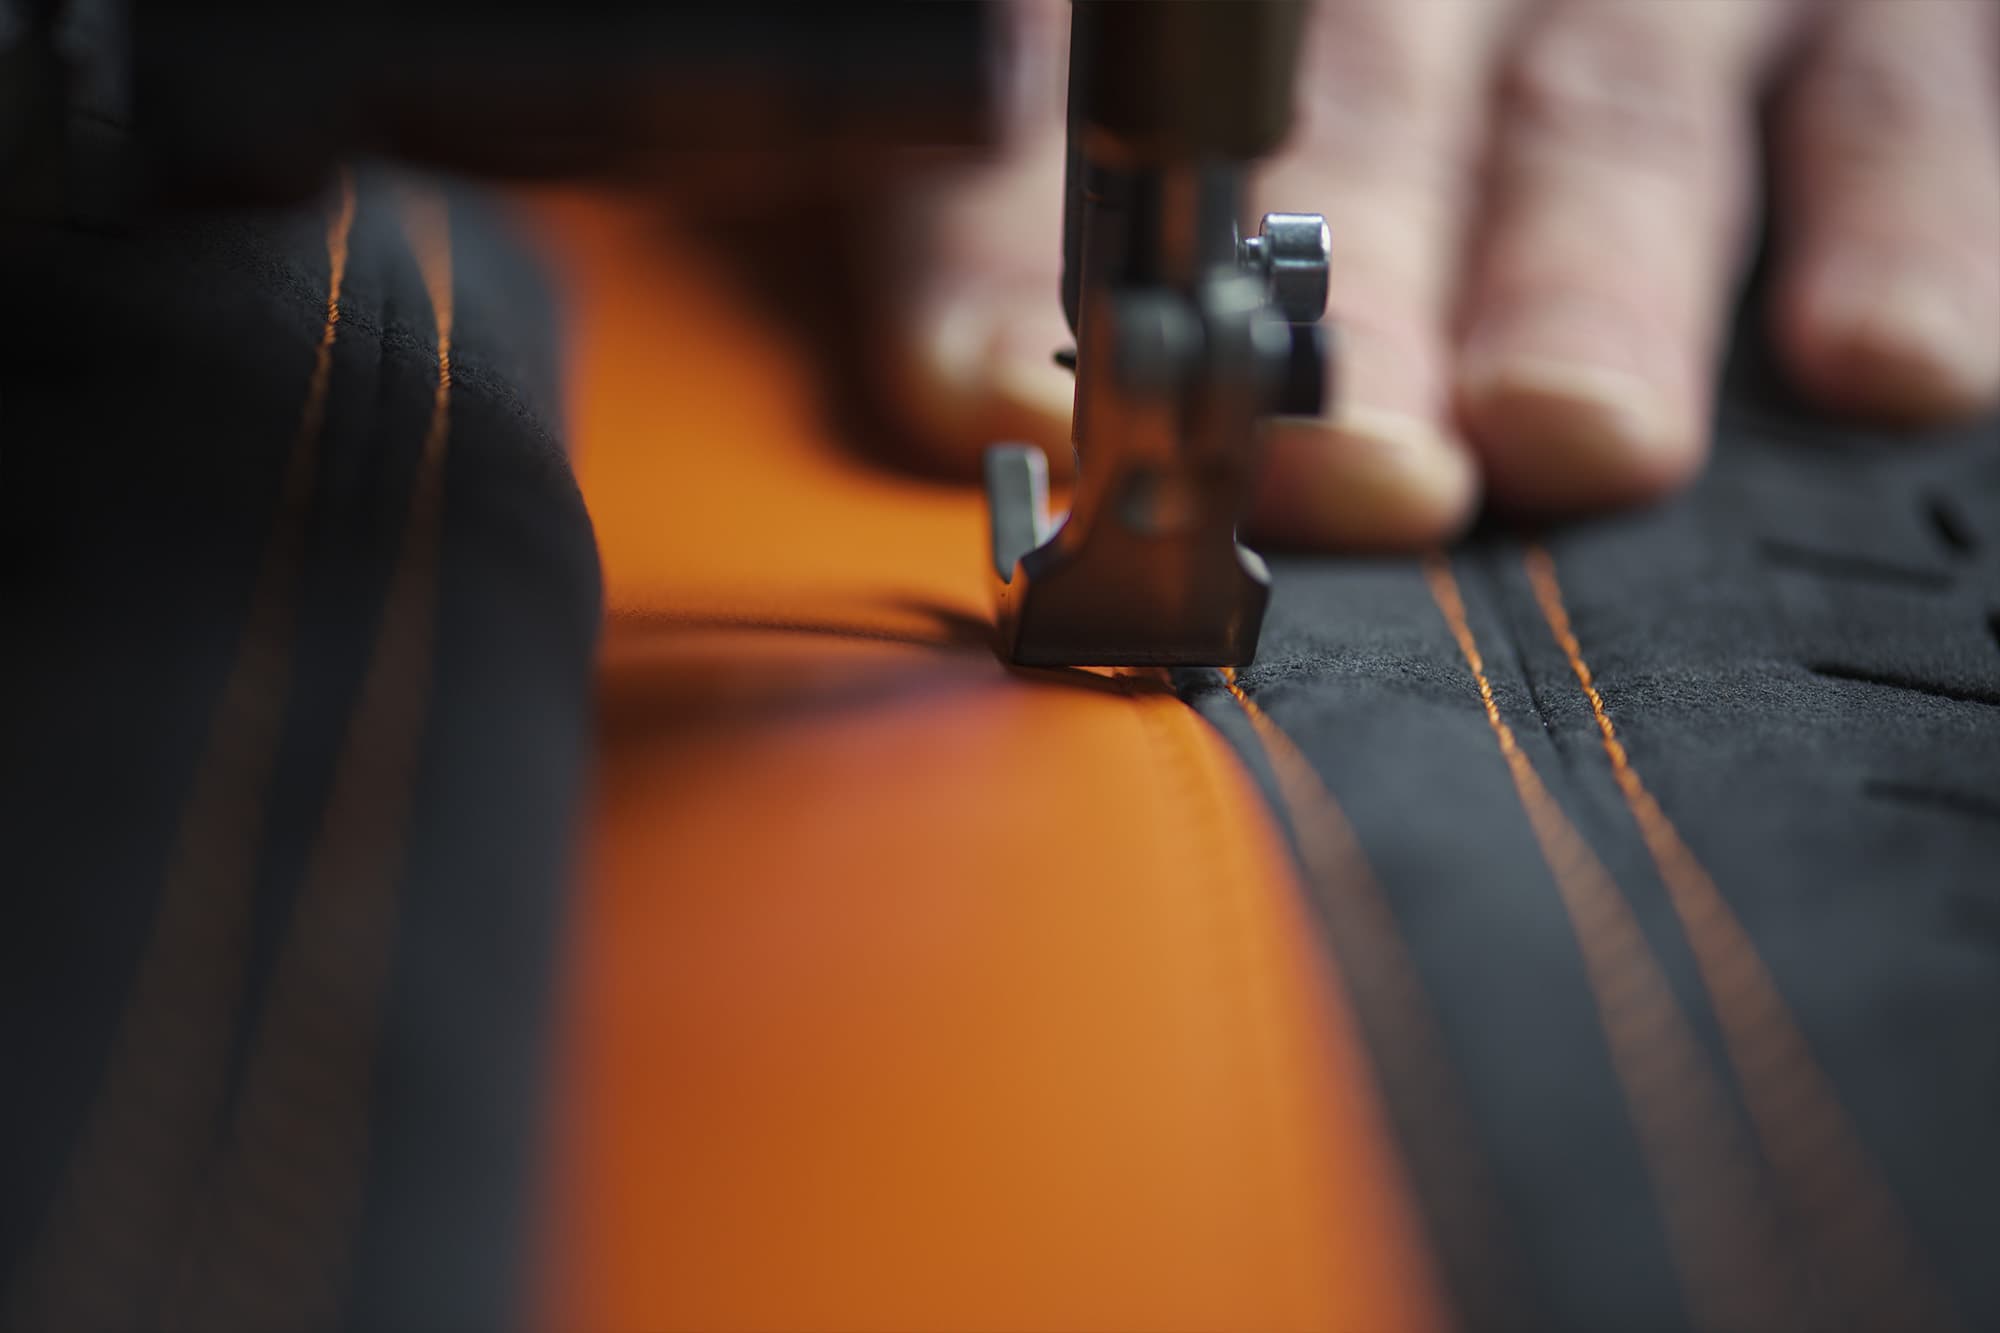 The sewing of the genuine leather